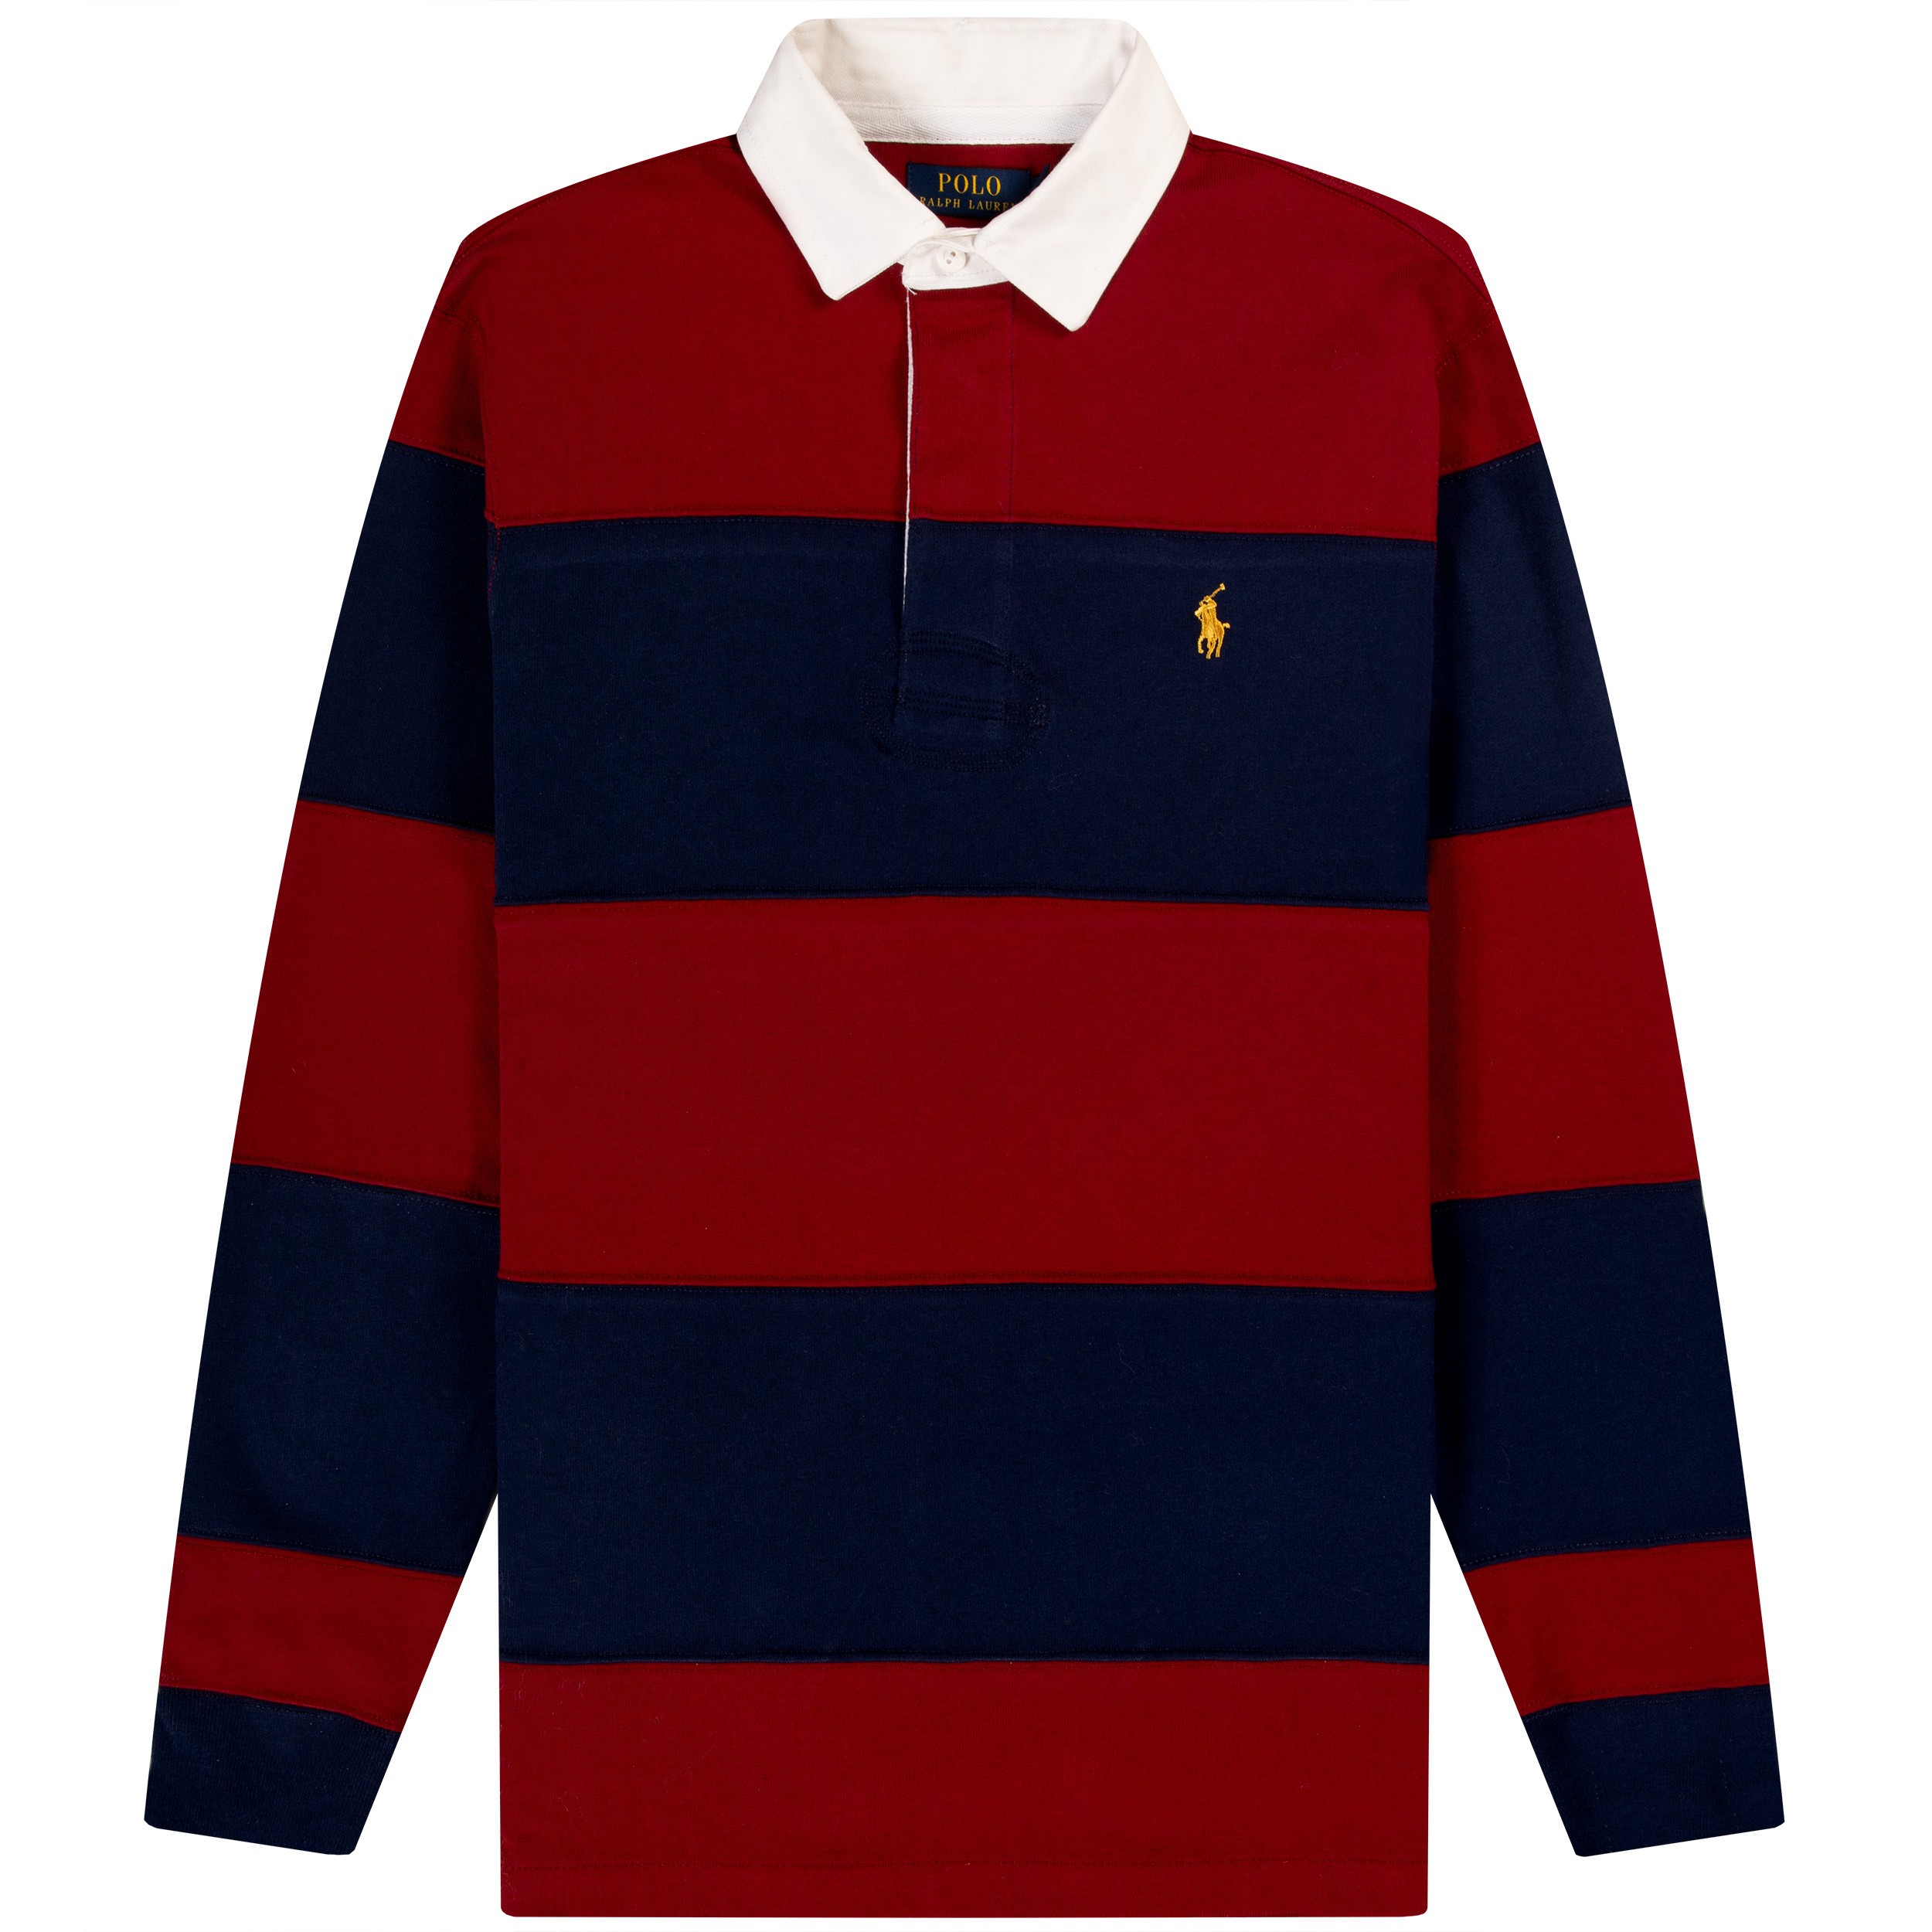 Polo Ralph Lauren Striped Rugby Polo Shirt Newport Navy/Holiday